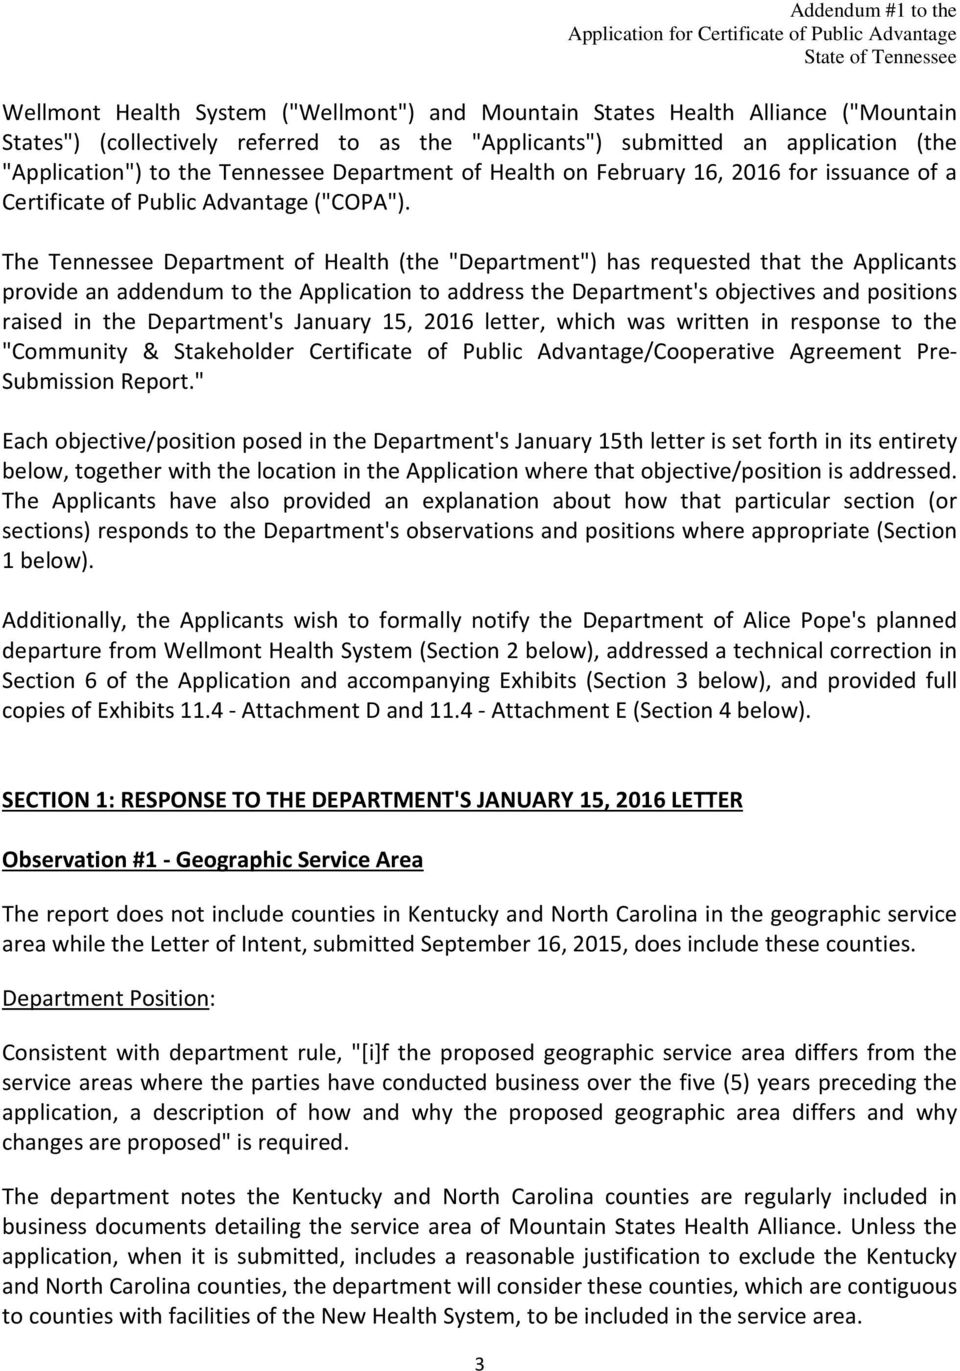 The Tennessee Department of Health (the "Department") has requested that the Applicants provide an addendum to the Application to address the Department's objectives and positions raised in the